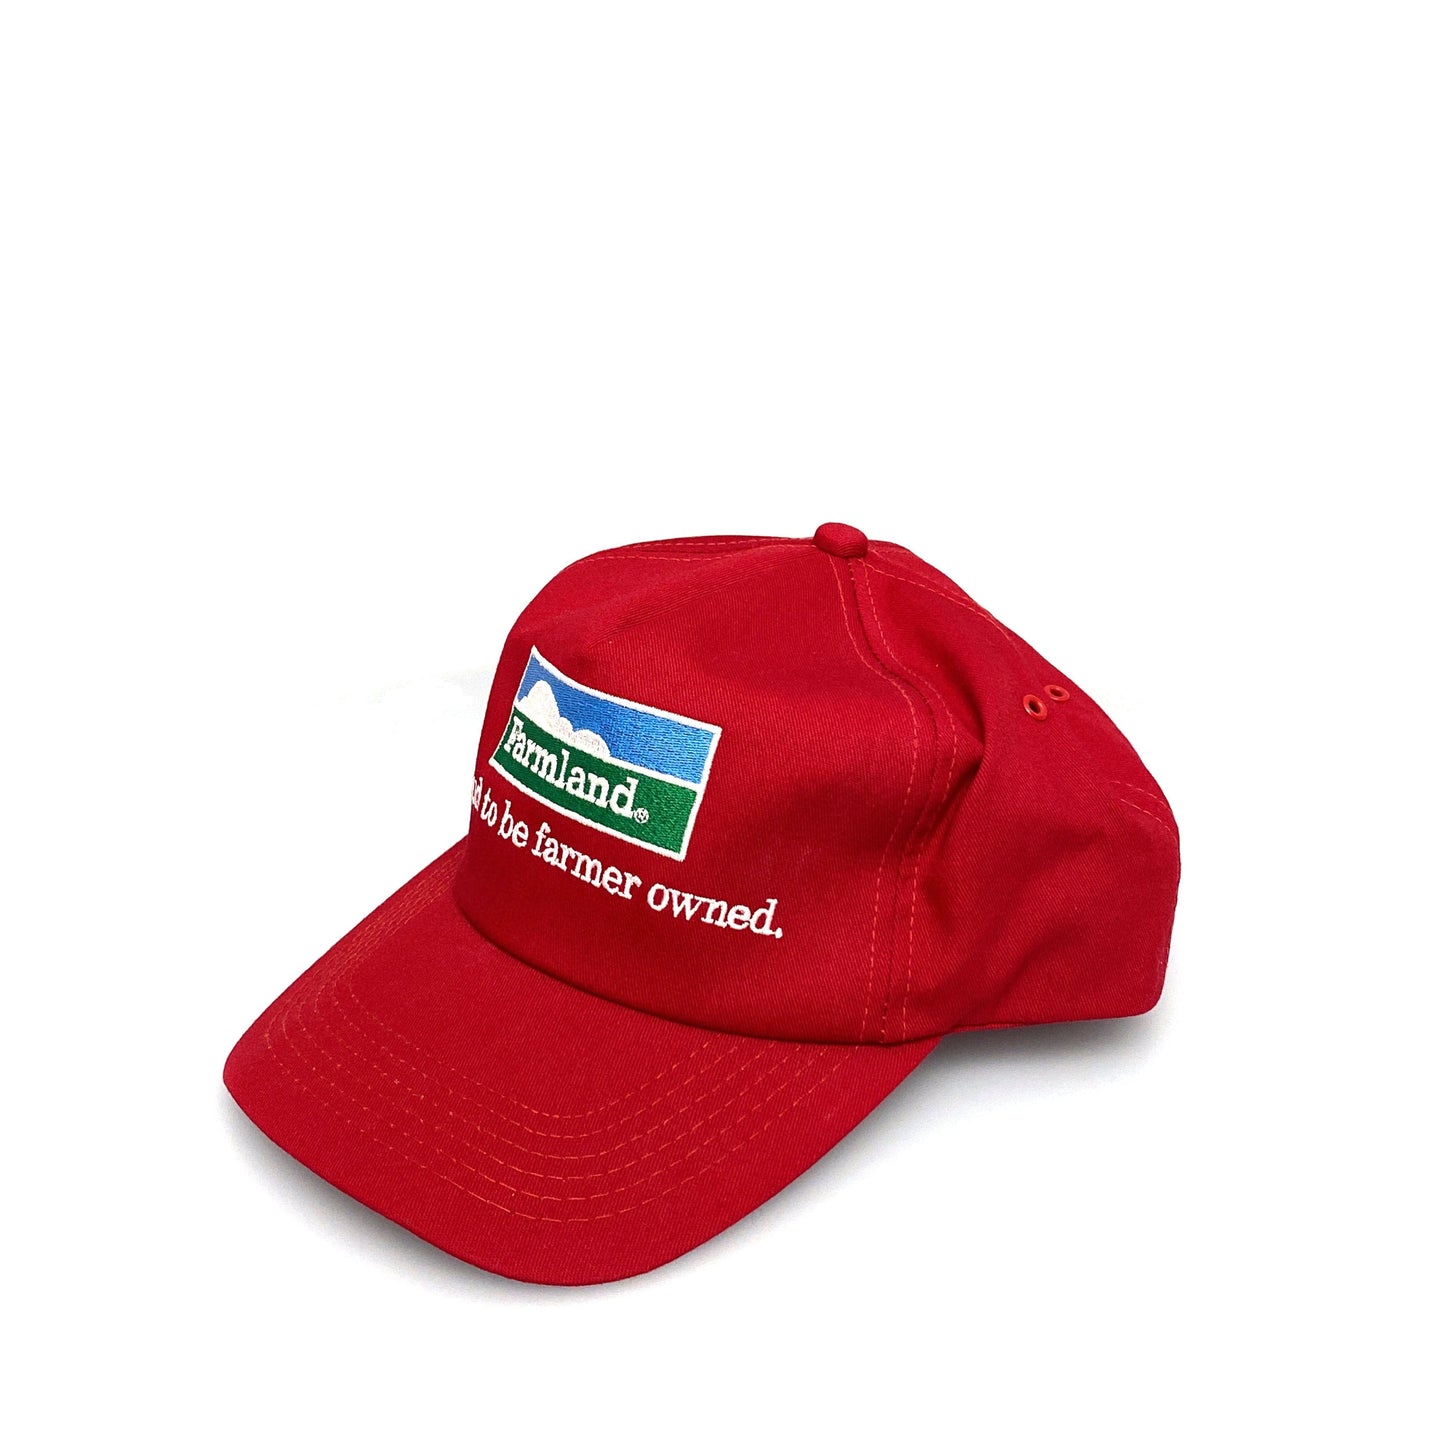 K-Products FARMLAND “Proud To Be A Farmer” 5-Panel Hat SnapBack OS Red Baseball Cap